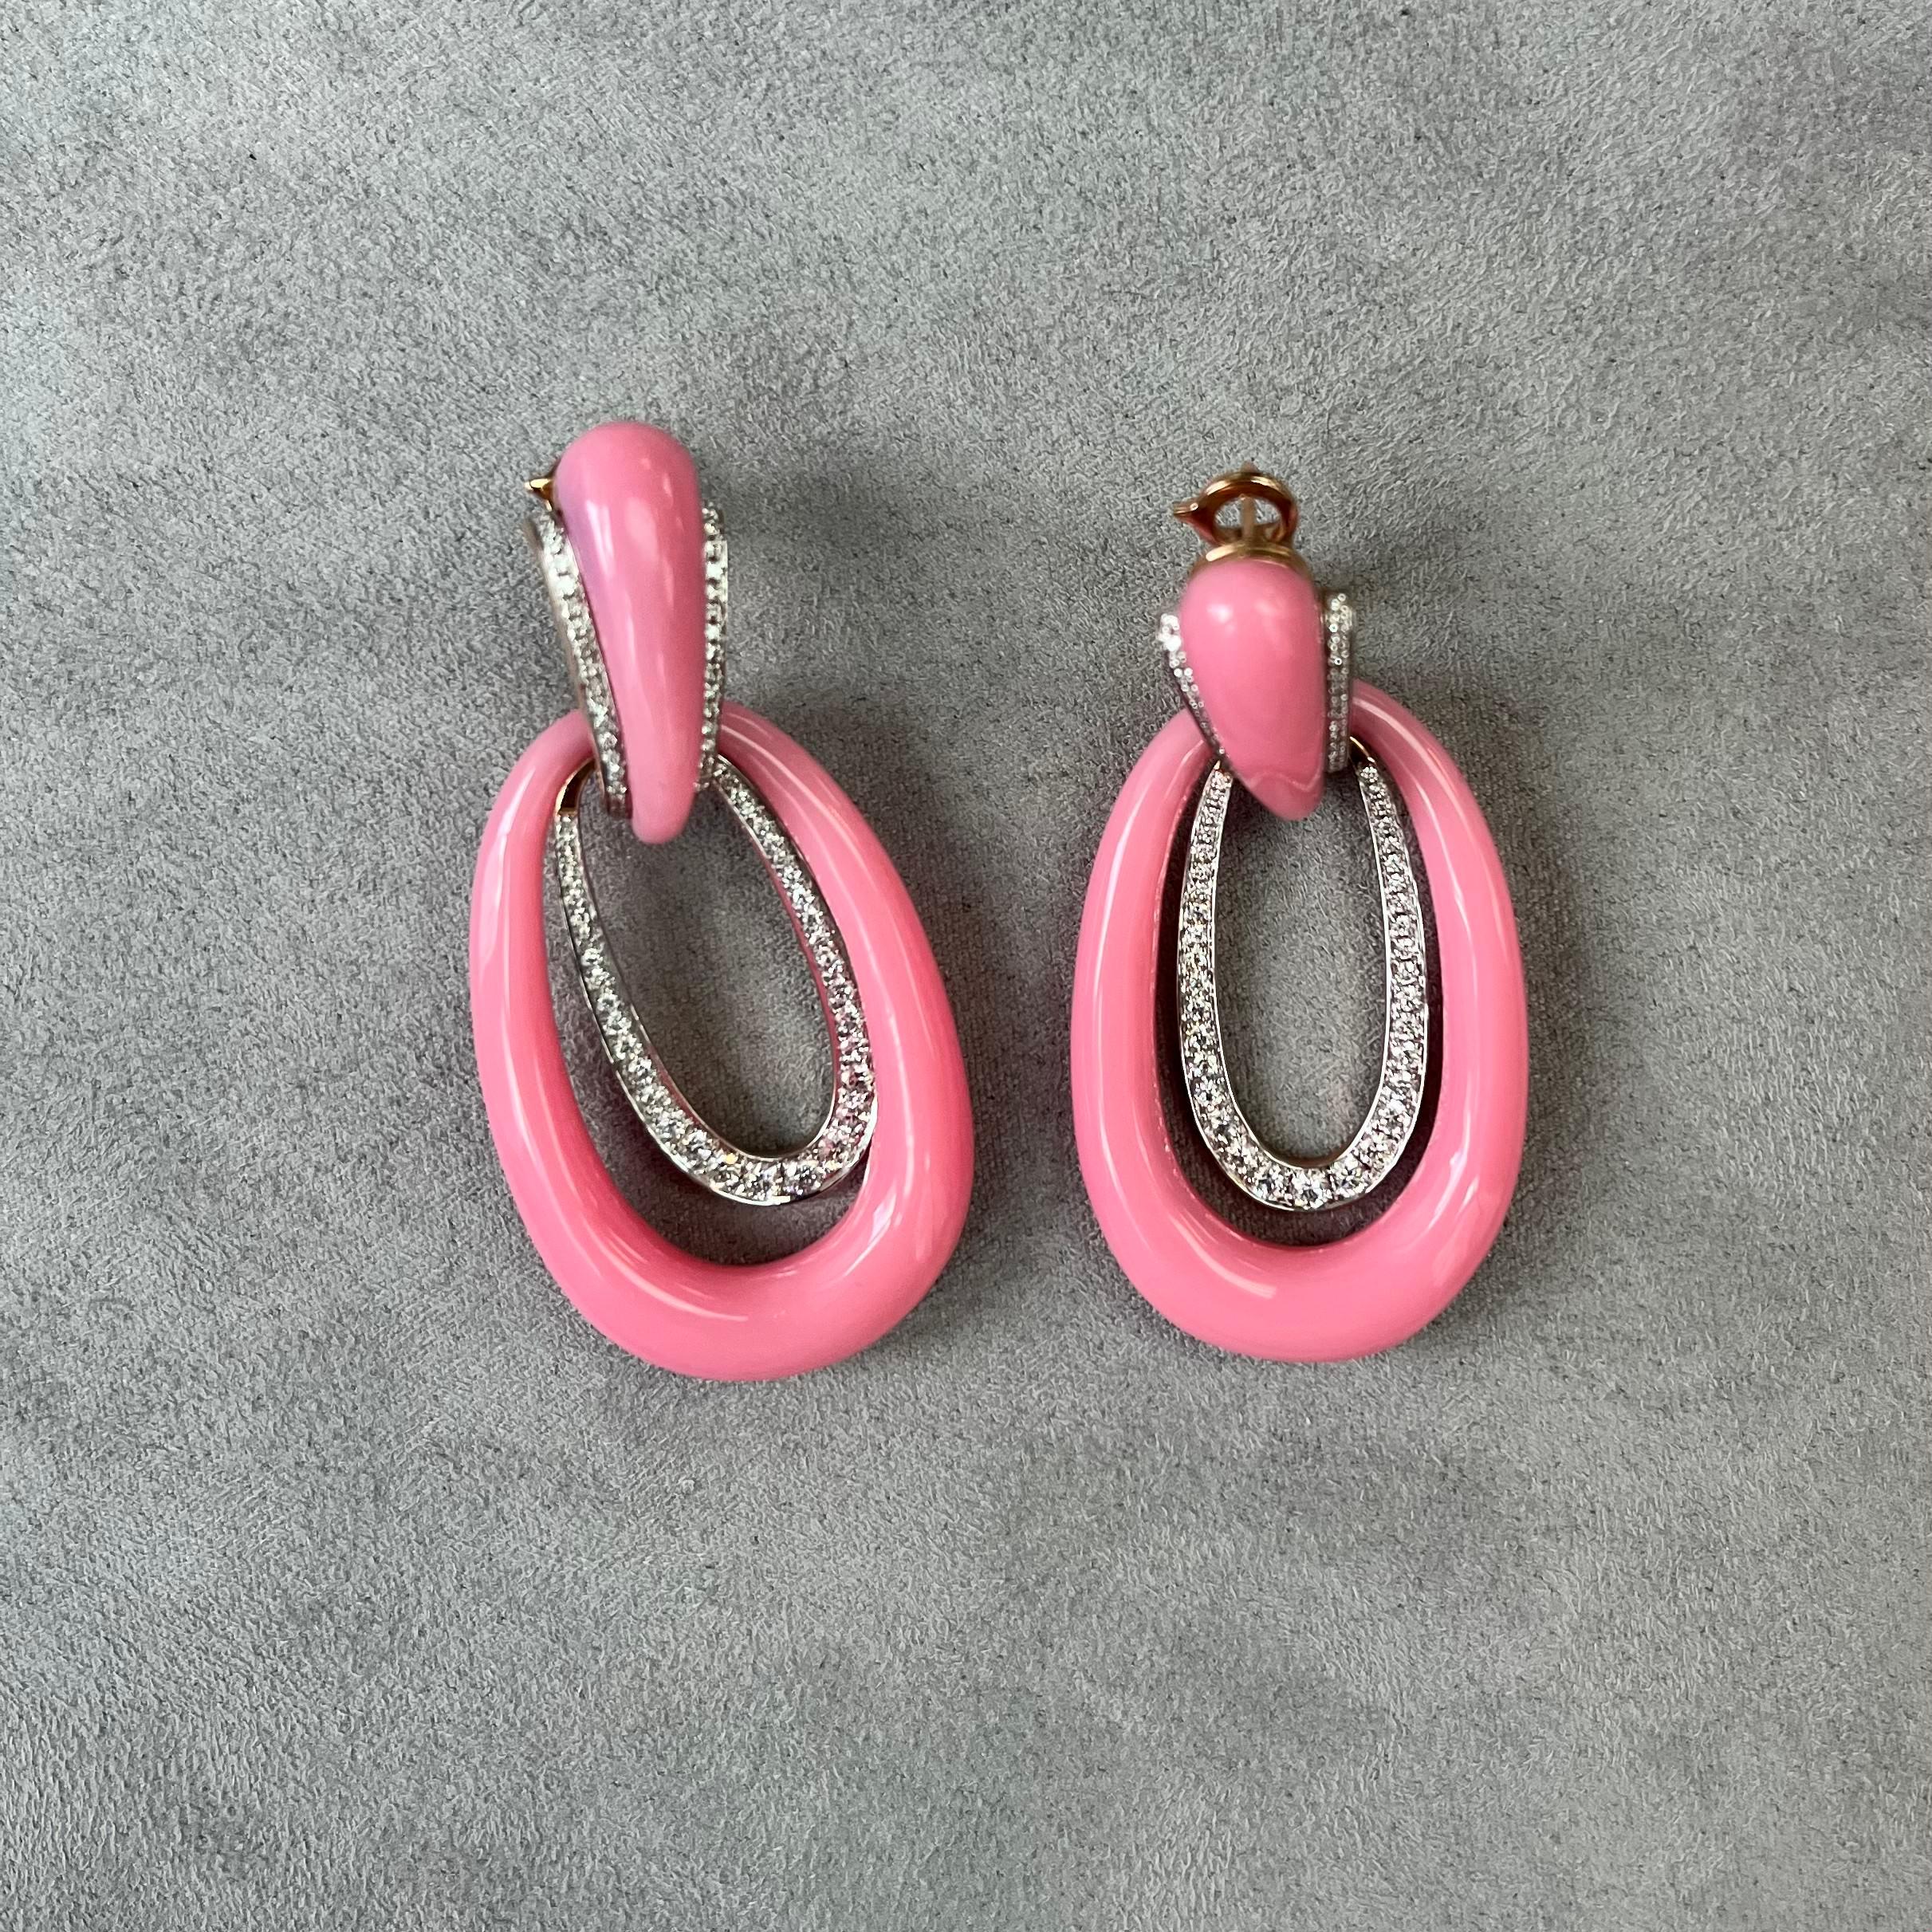 Bright Pink Candy Color Imitation Earrings with 18K Gold and  Natural  Diamonds.

18K Rose Gold 11.24 GM
146RD-1.20 CT

Looking for a statement piece to add to your jewelry collection? Look no further than our 18K gold and diamond earrings in a